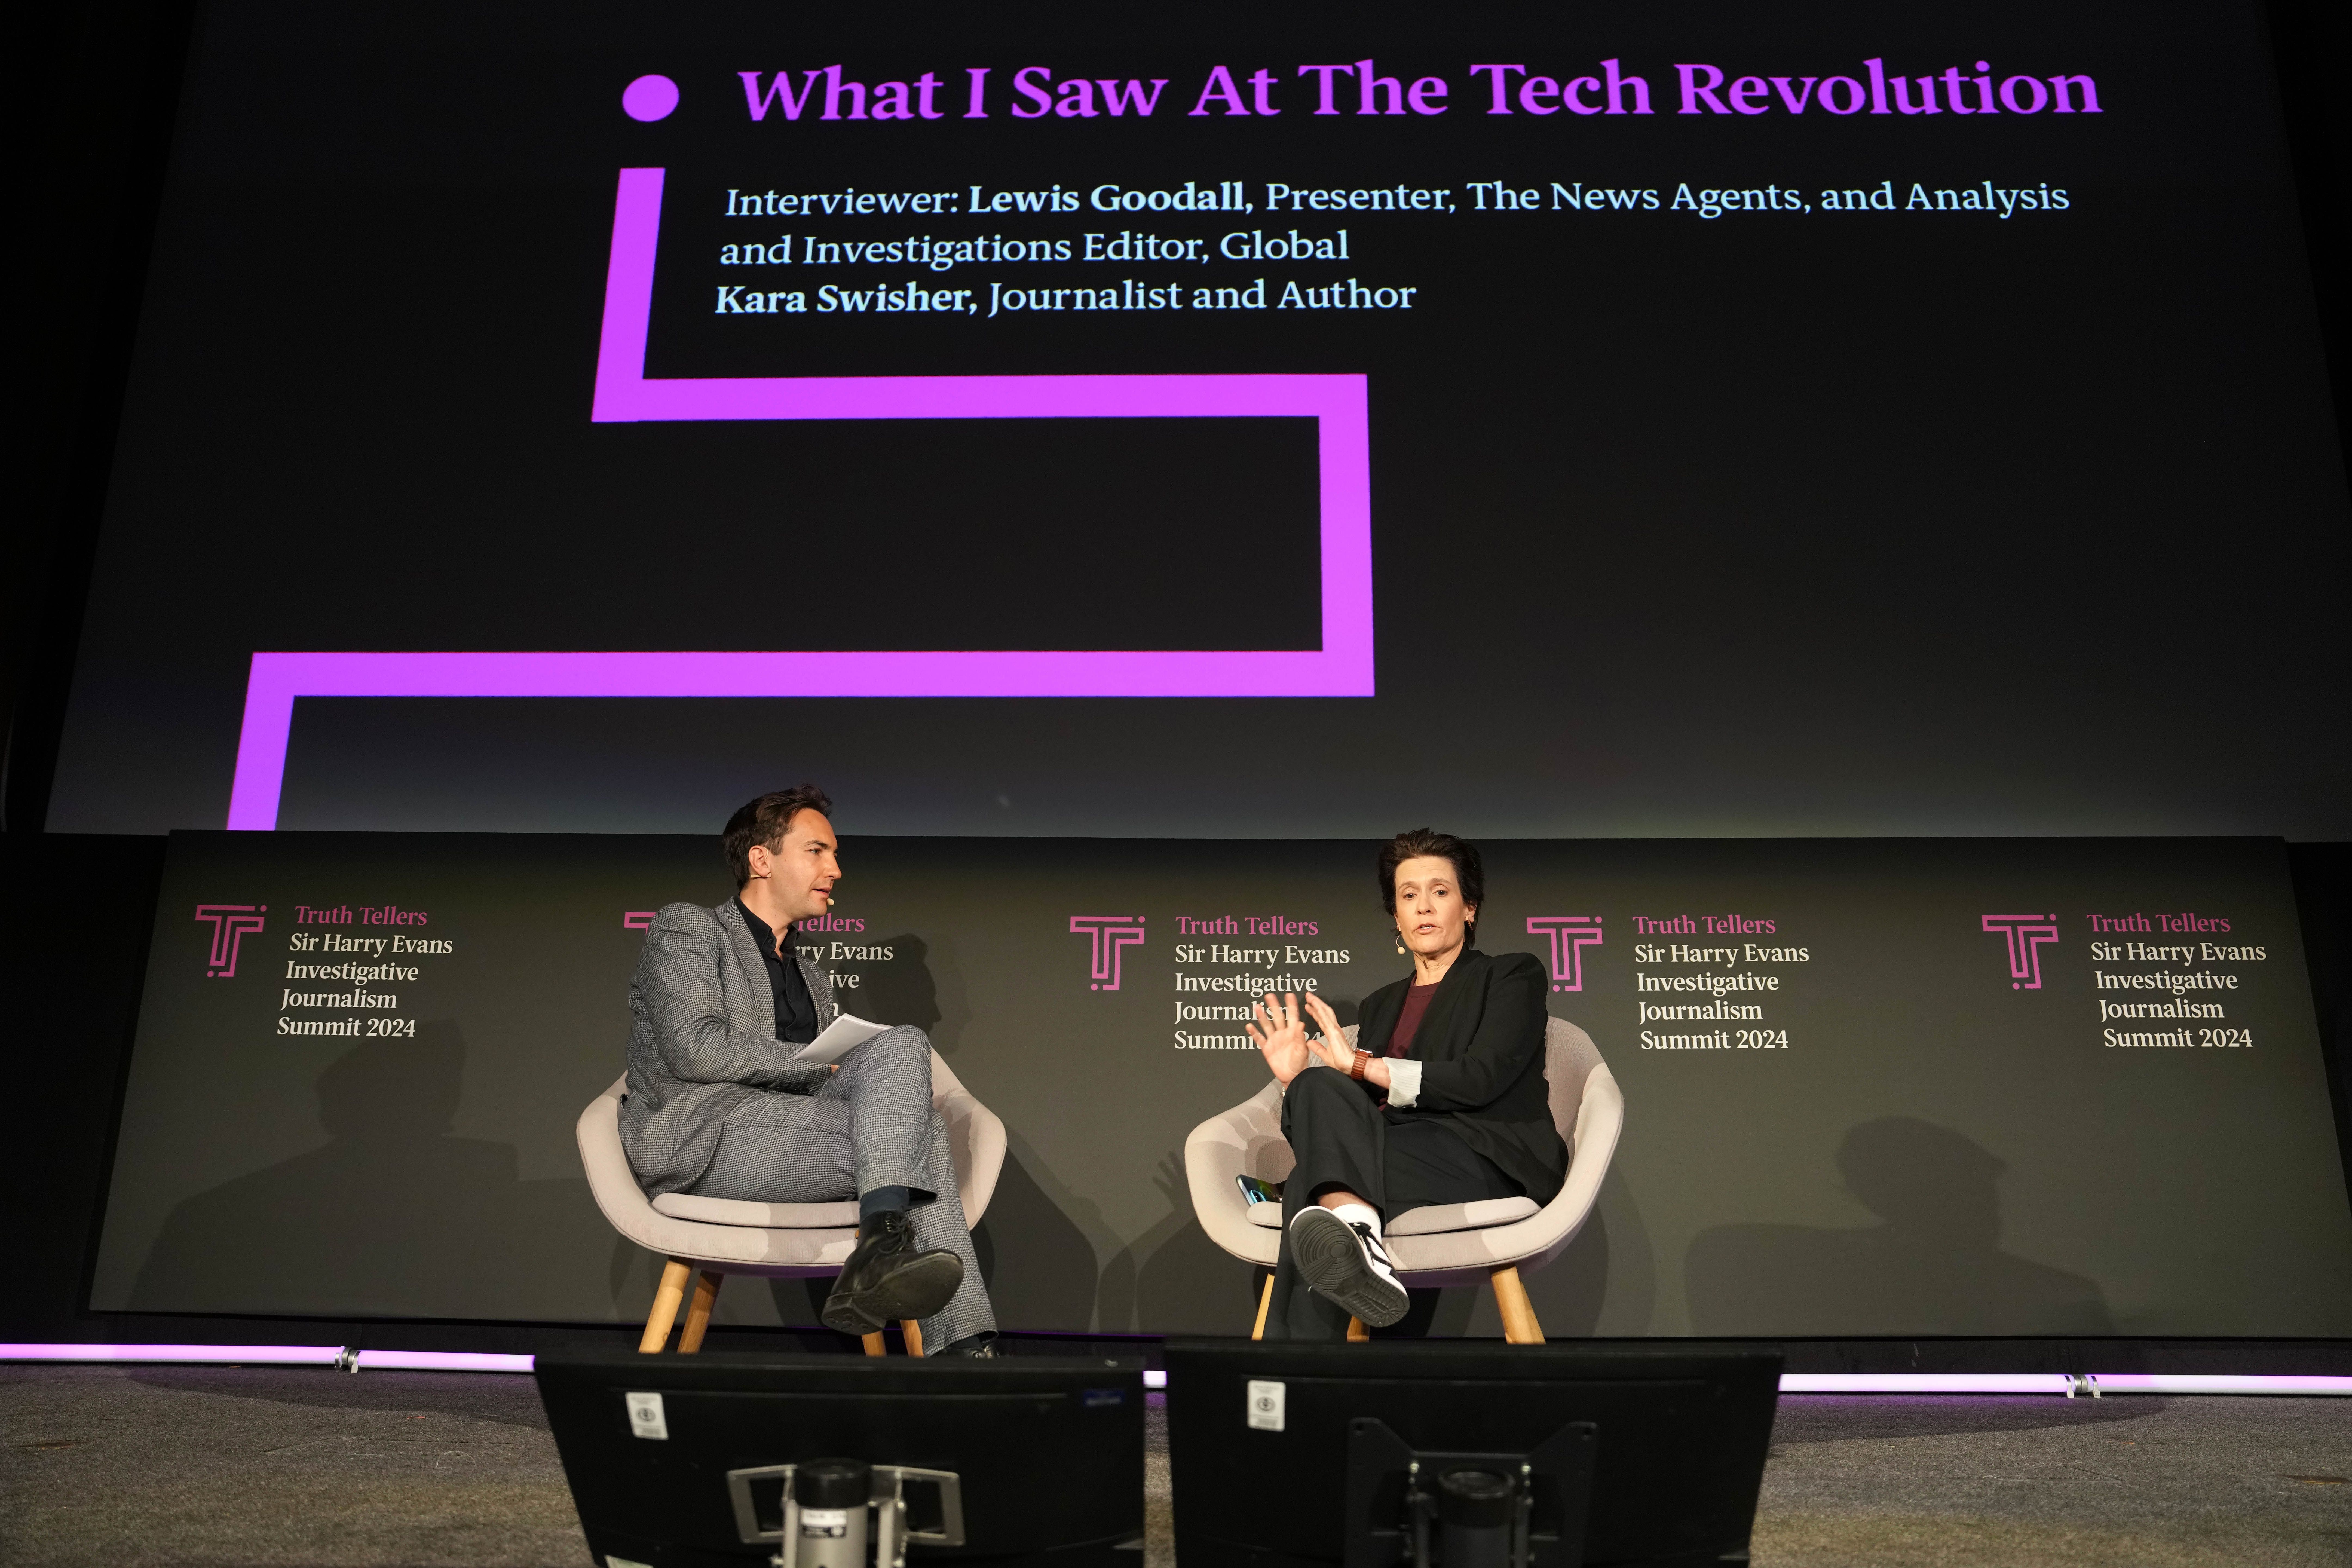 Kara Swisher, interviewed about the Tech Revolution by Lewis Goodall